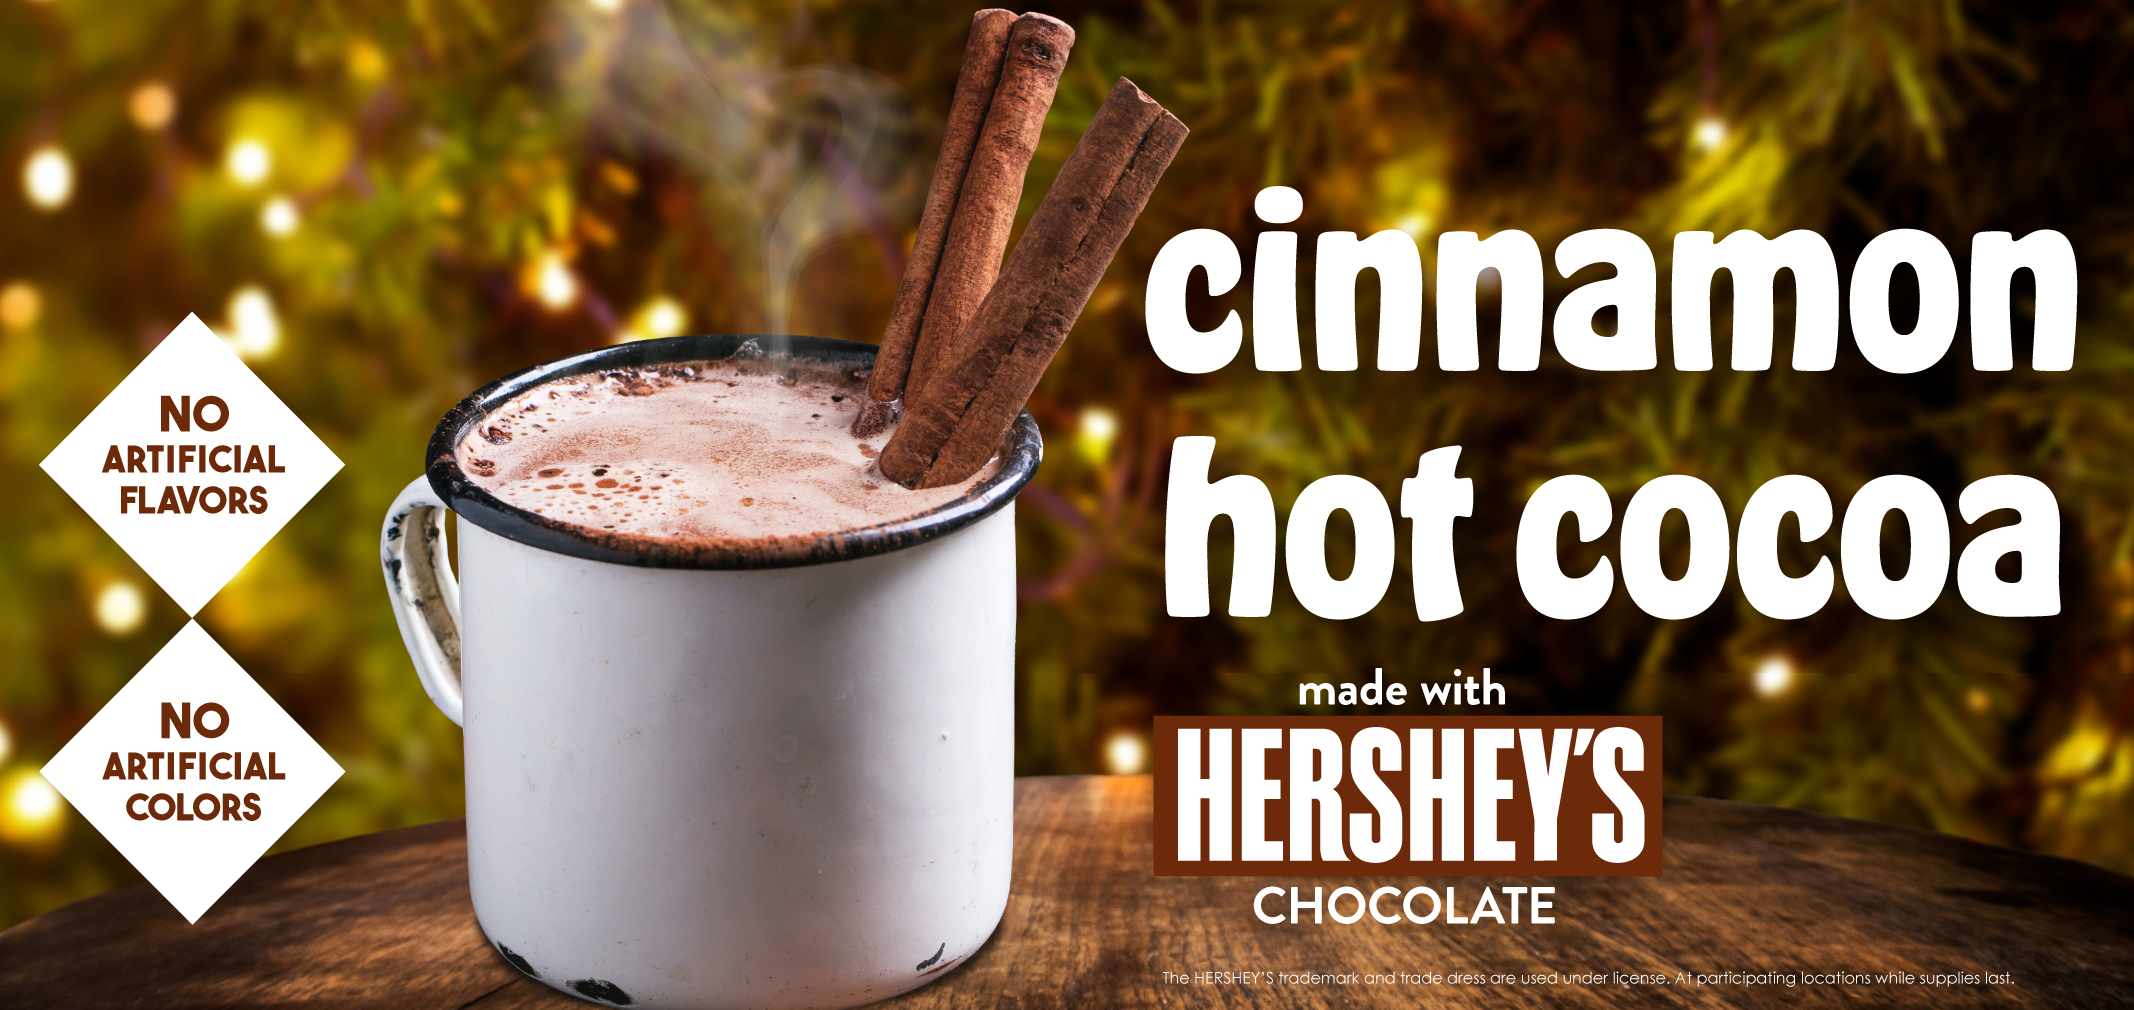 Cinnamon Hot Cocoa made with Hershey's Chocolate label image